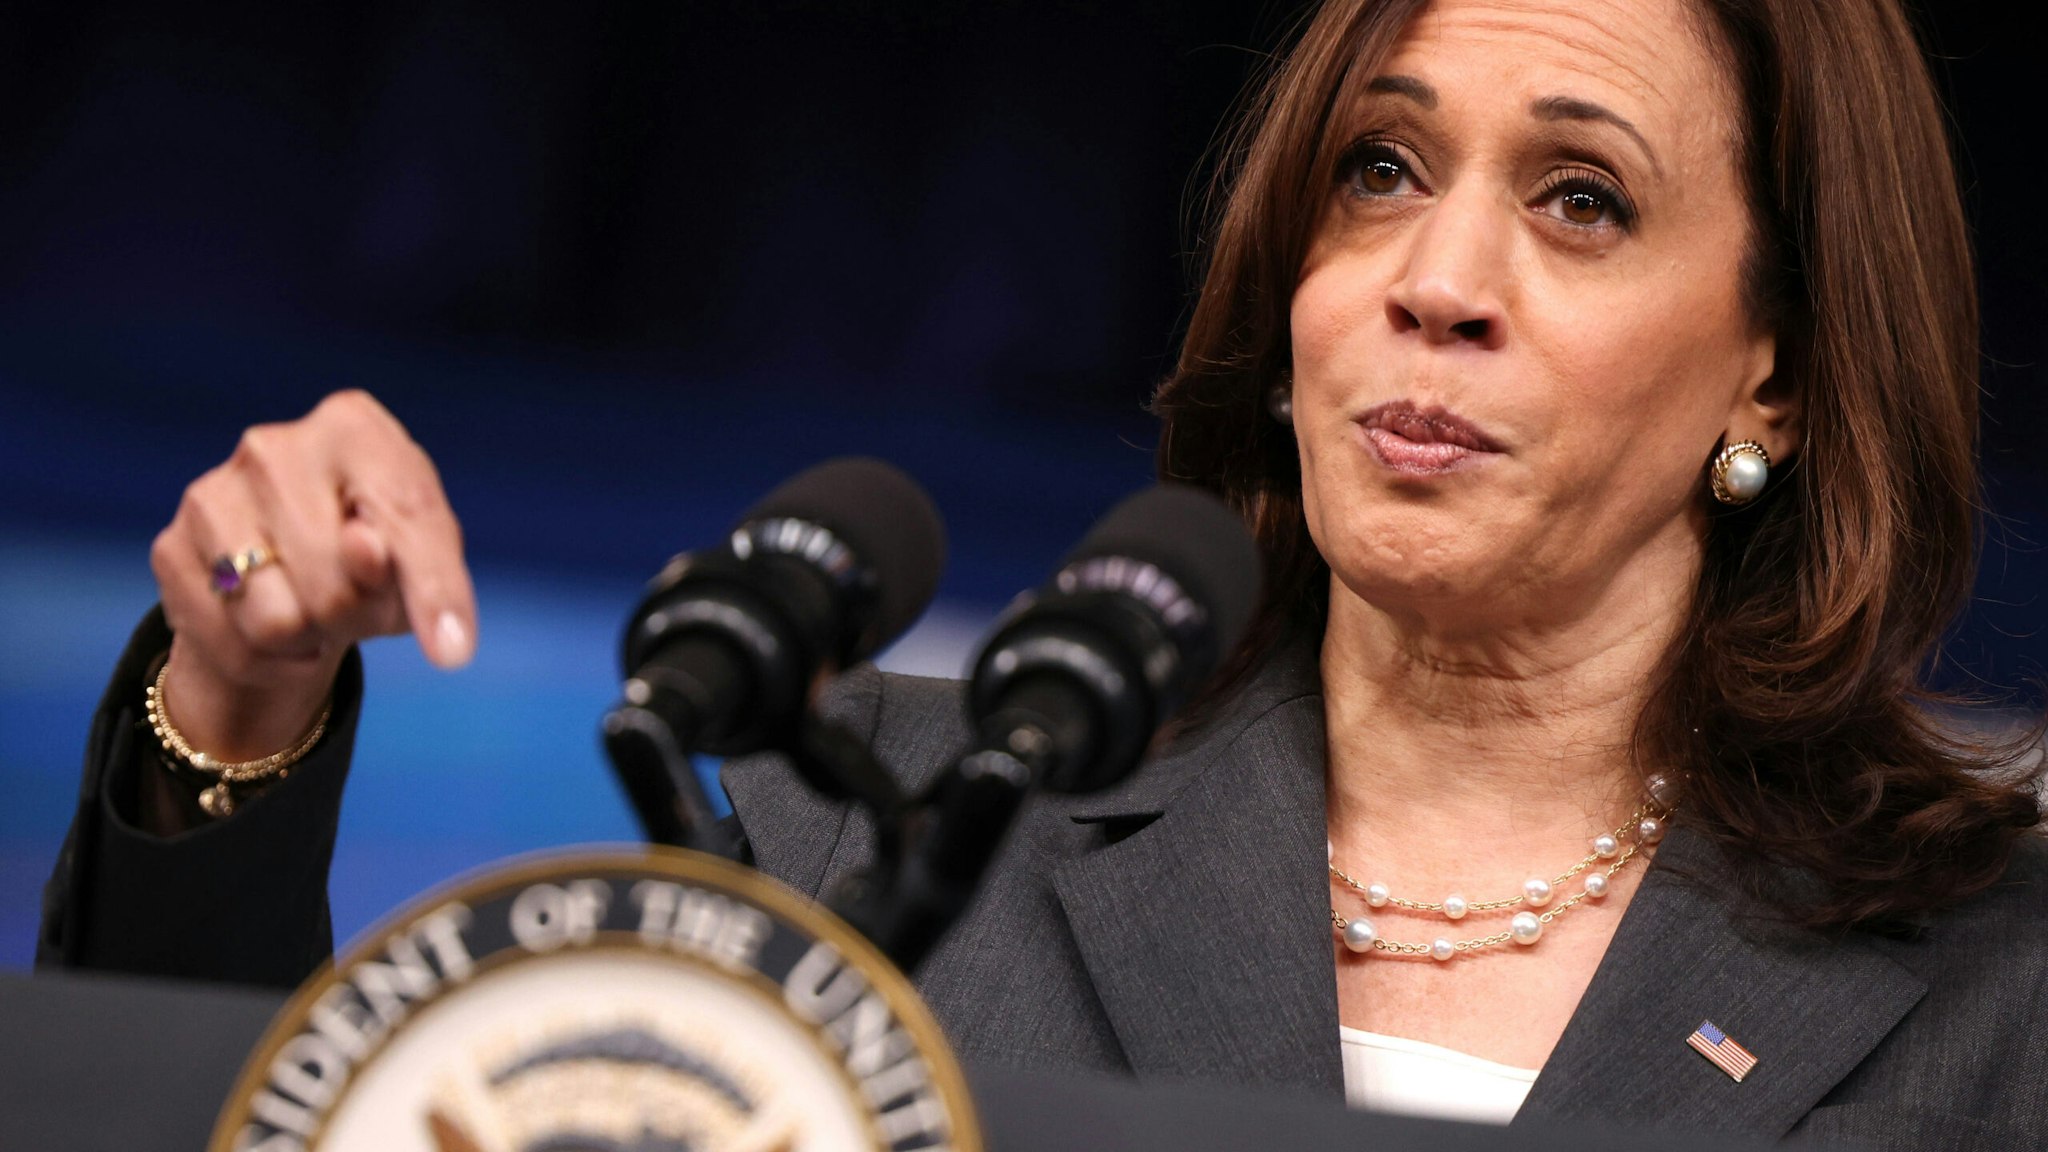 WASHINGTON, DC - JULY 27: U.S. Vice President Kamala Harris gestures as she delivers remarks in the South Court Auditorium in the Eisenhower Executive Office Building on July 27, 2021 in Washington, DC. Harris addressed the National Bar Association virtually and stressed the importance of voting rights legislation.